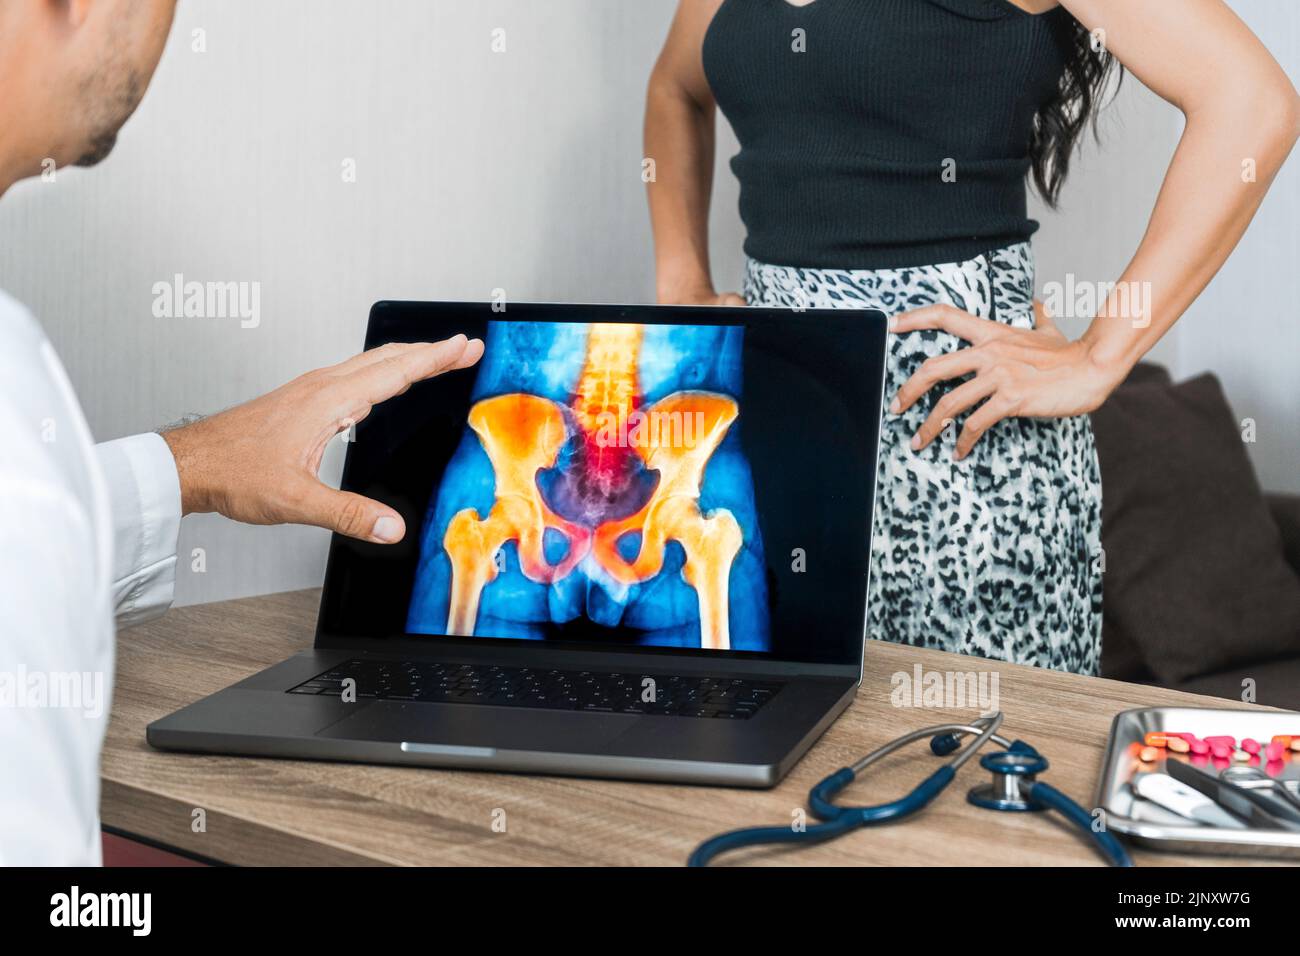 Doctor showing a x-ray of pain in the hips on a laptop. Woman patient in the background Stock Photo